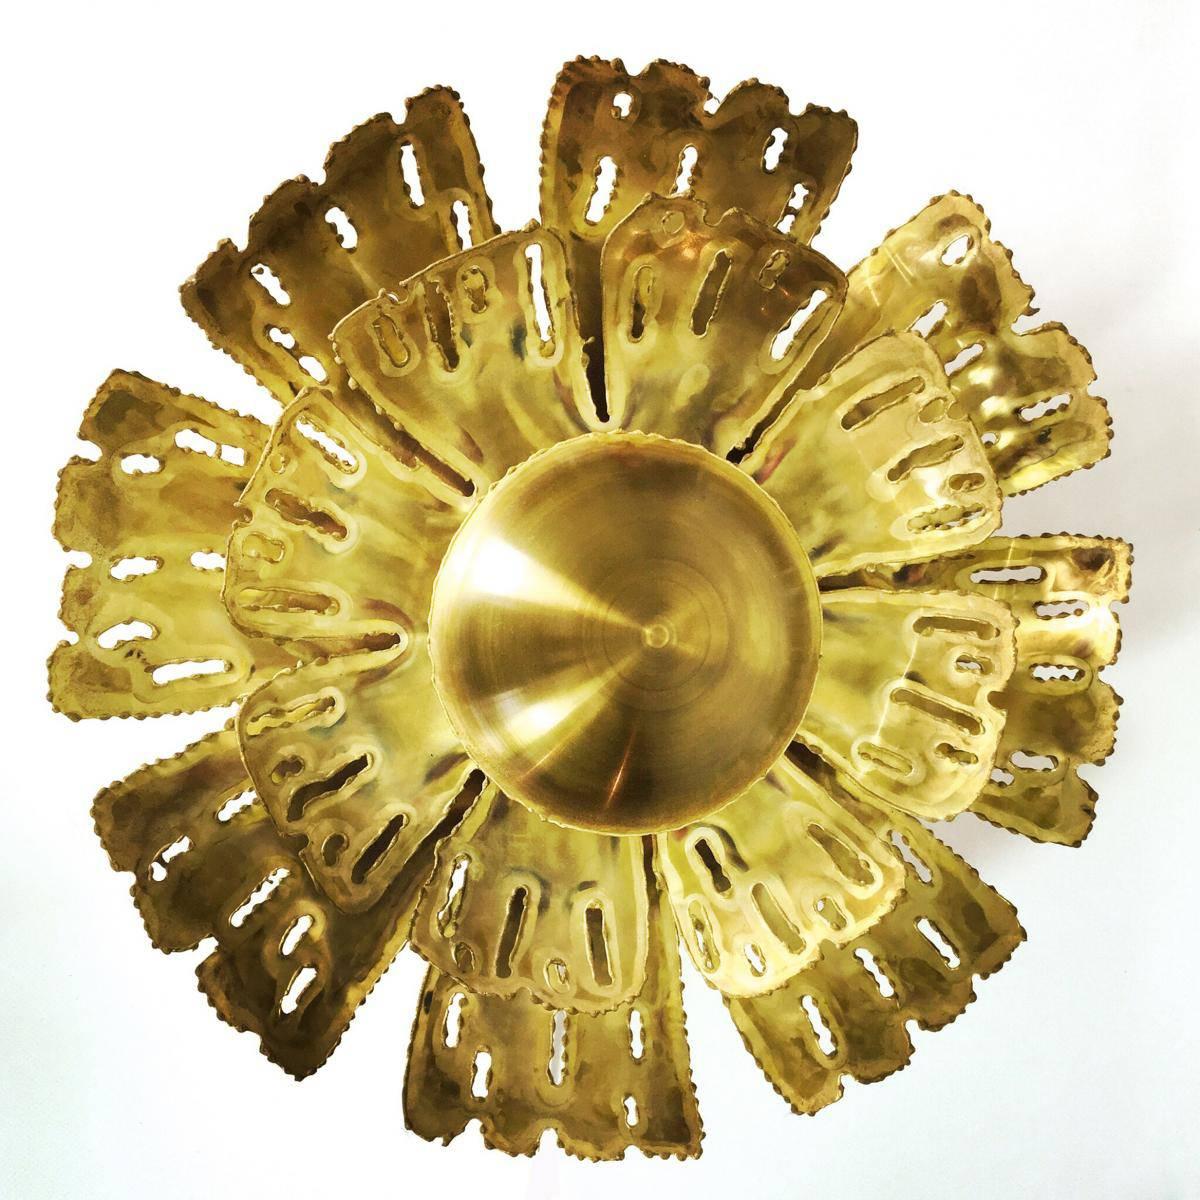 This beautiful wall light was designed by Sven Aage Holm Sørensen for Holm Sørensen and Co. in the 1960s.

It is made from acid-etched brass. Brass in a flower form. This lamp is in a very good vintage condition with some very few age signs of